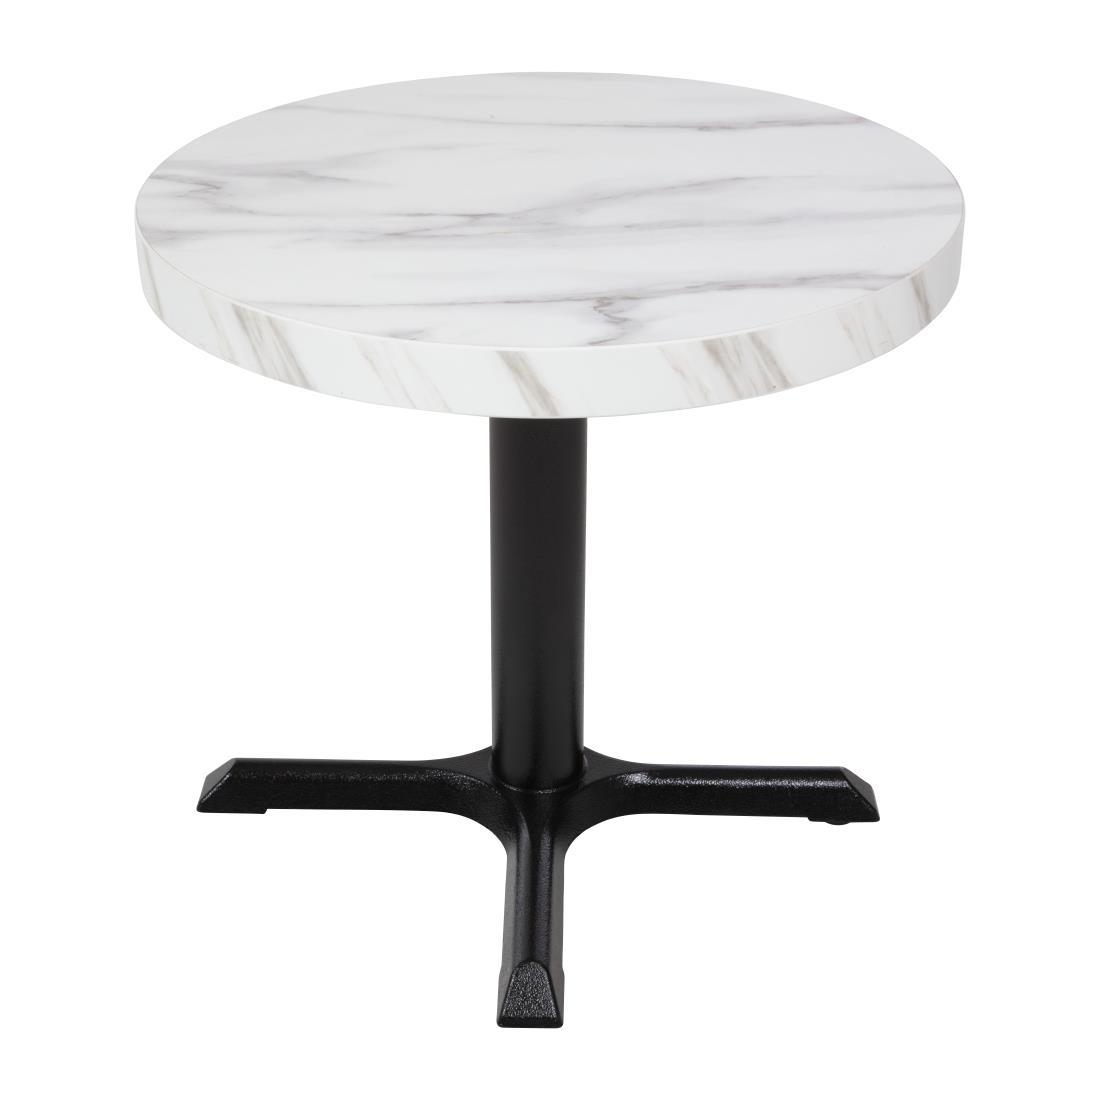 Bolero Pre-drilled Round Table Top Marble Effect 600mm - DT445  - 3